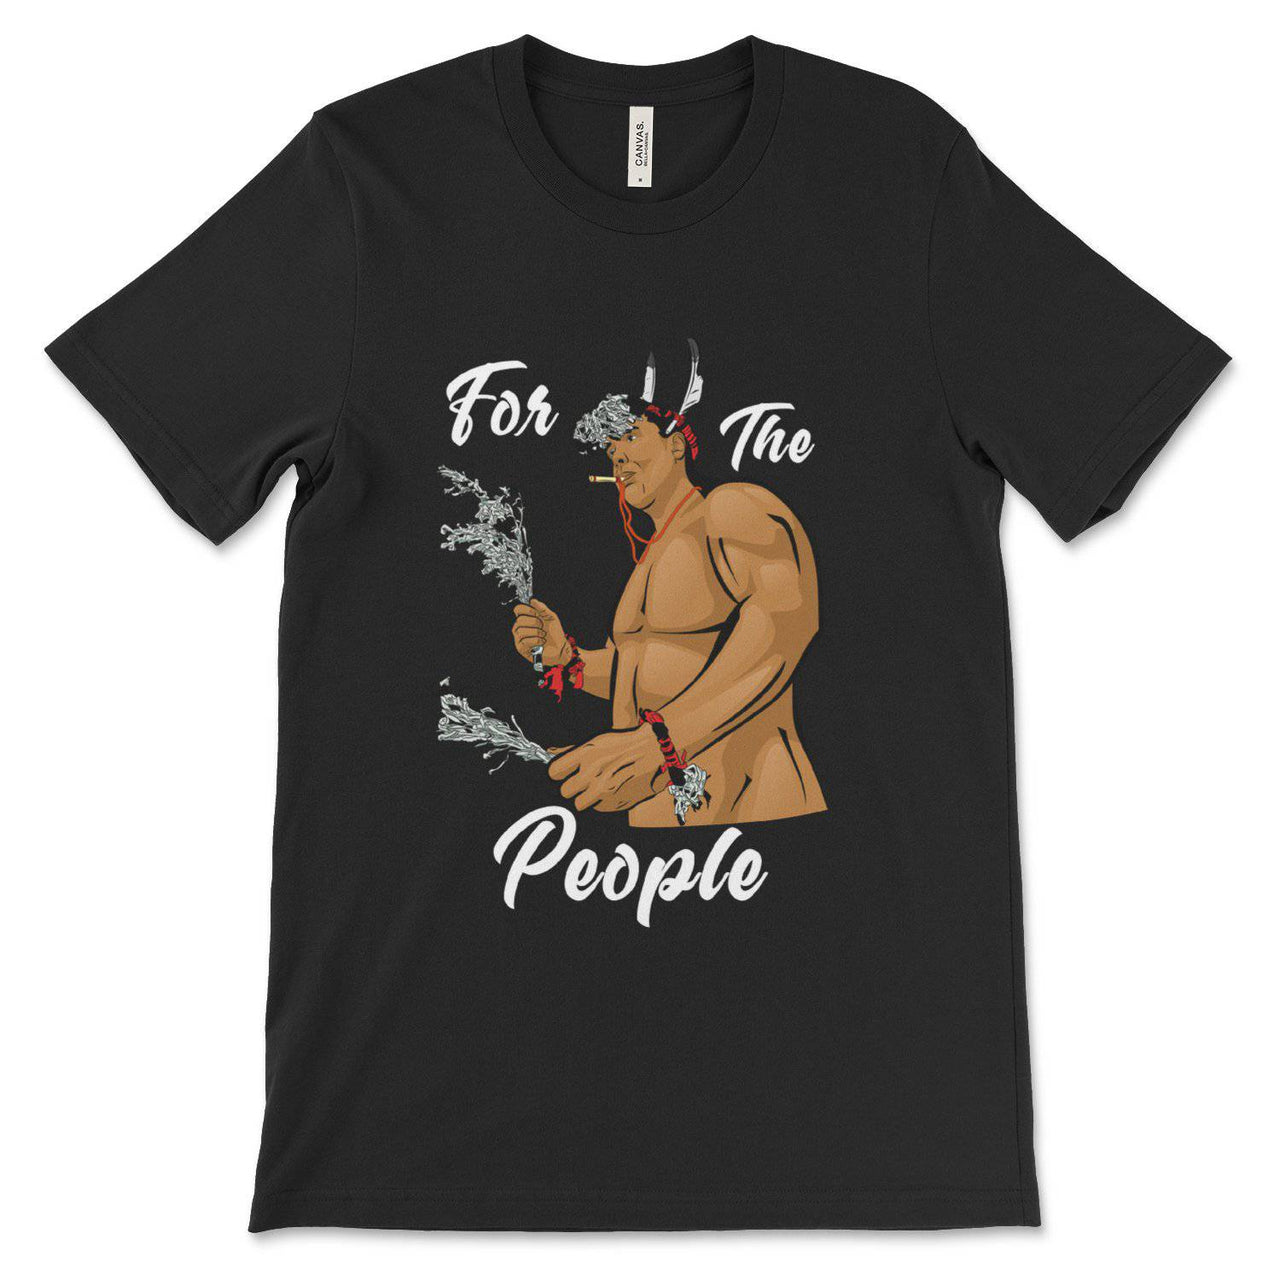 For The People Youth Tee